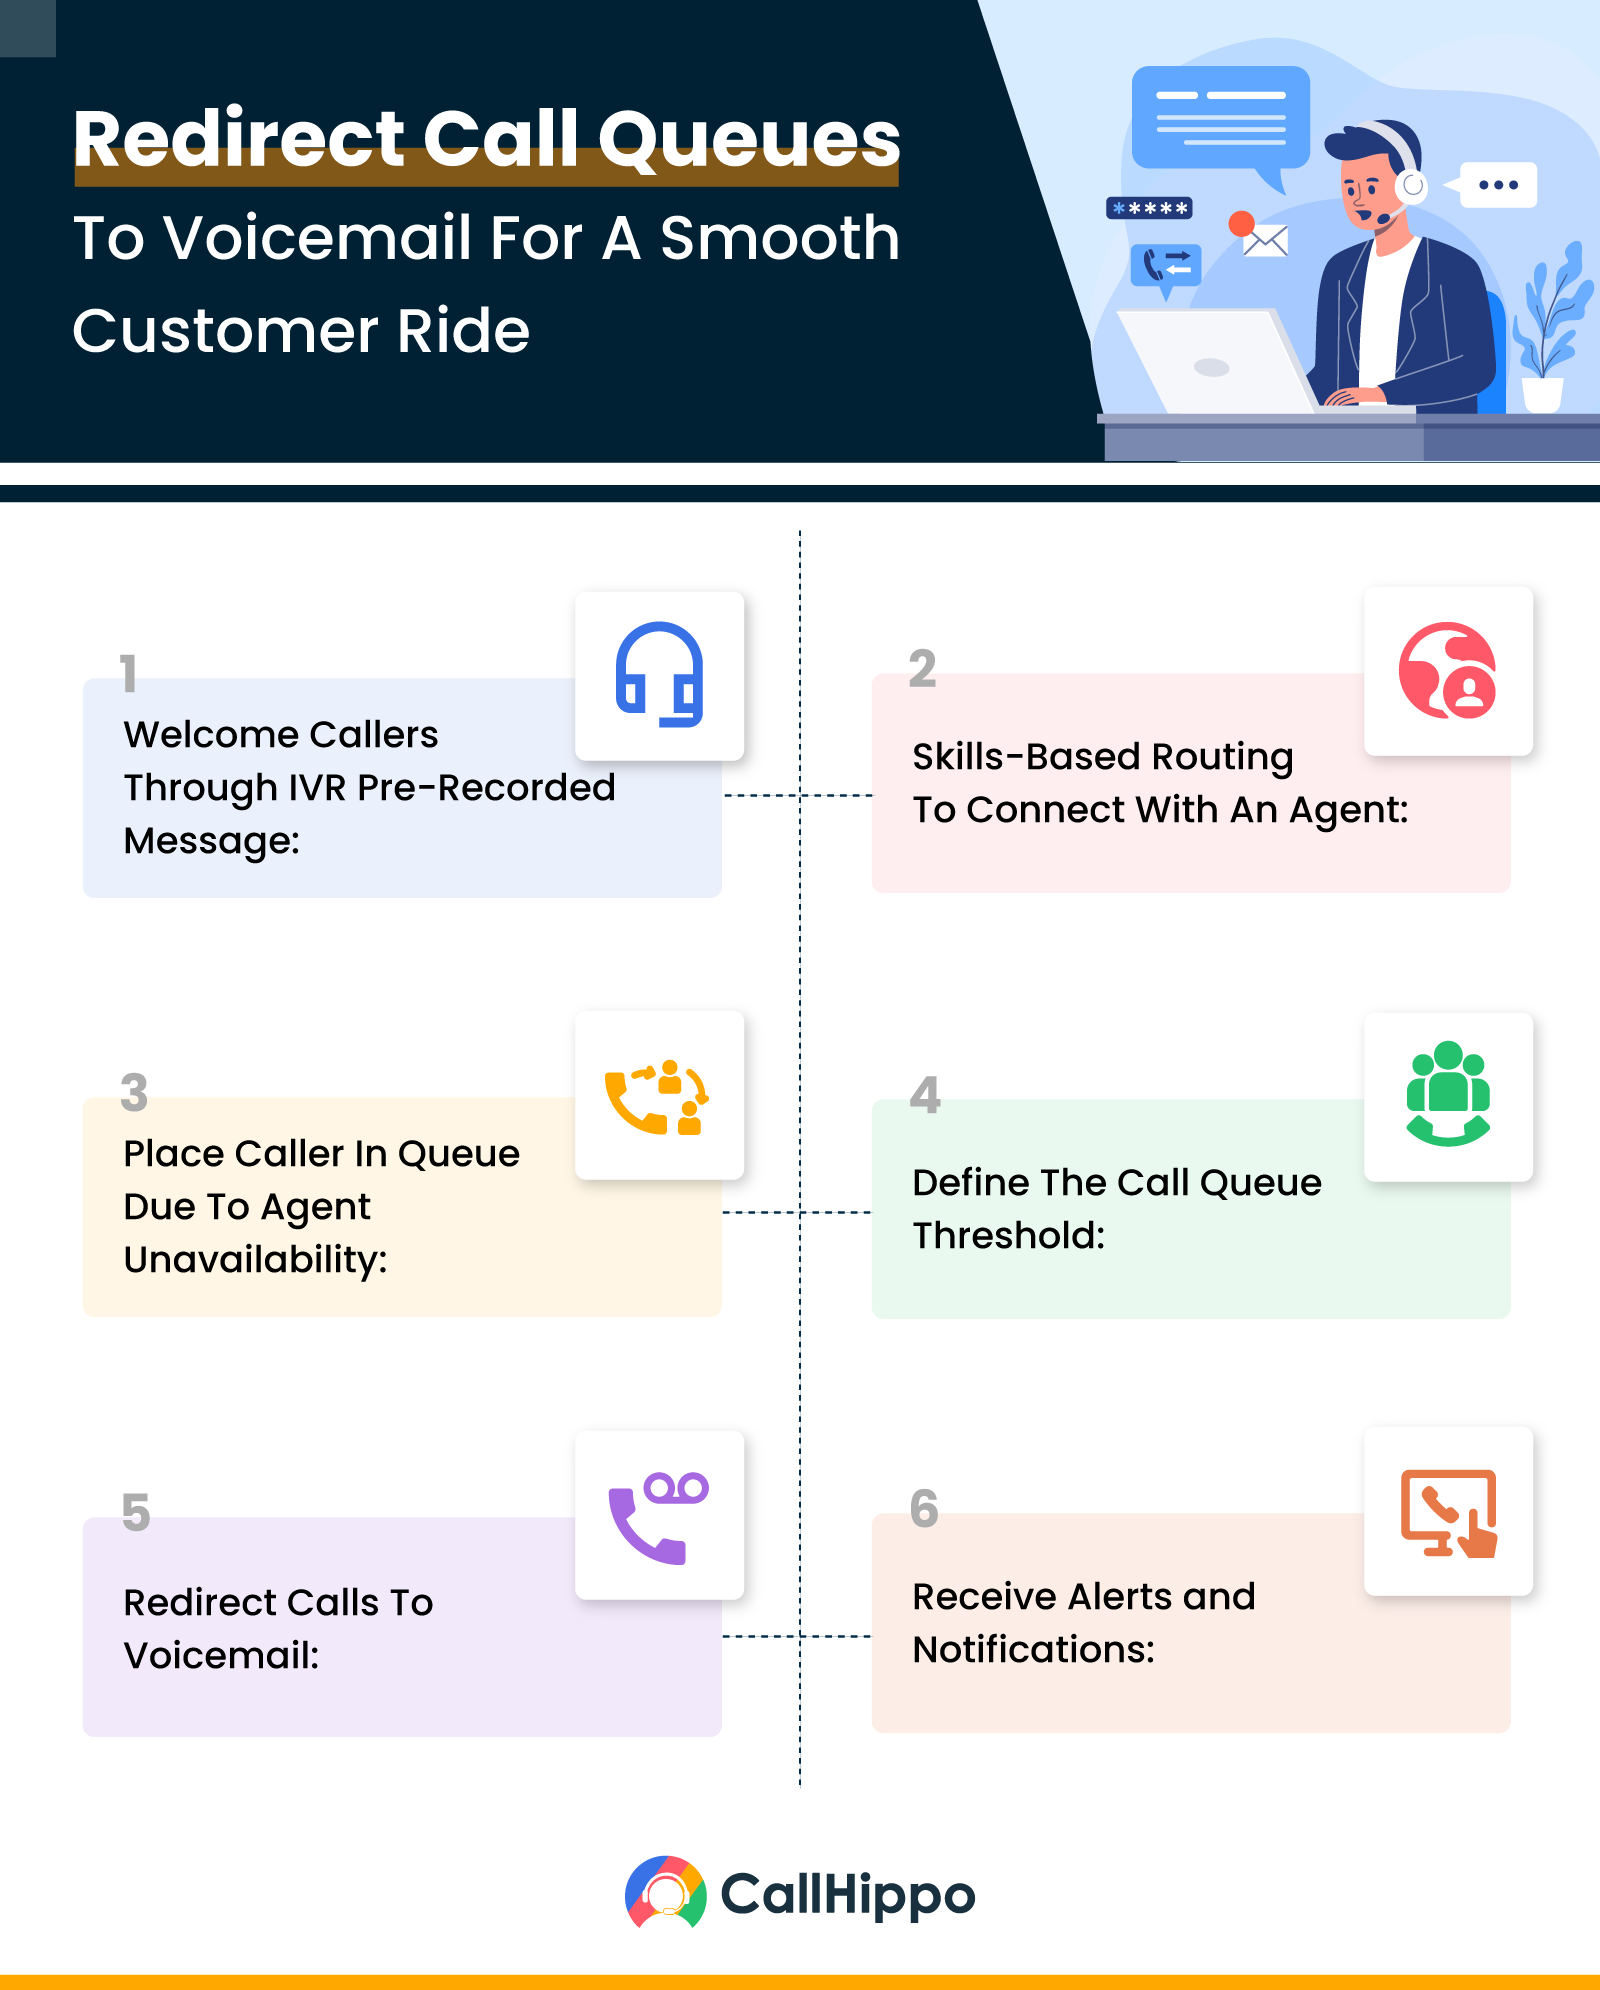 Redirect call queues to voicemail - infographic